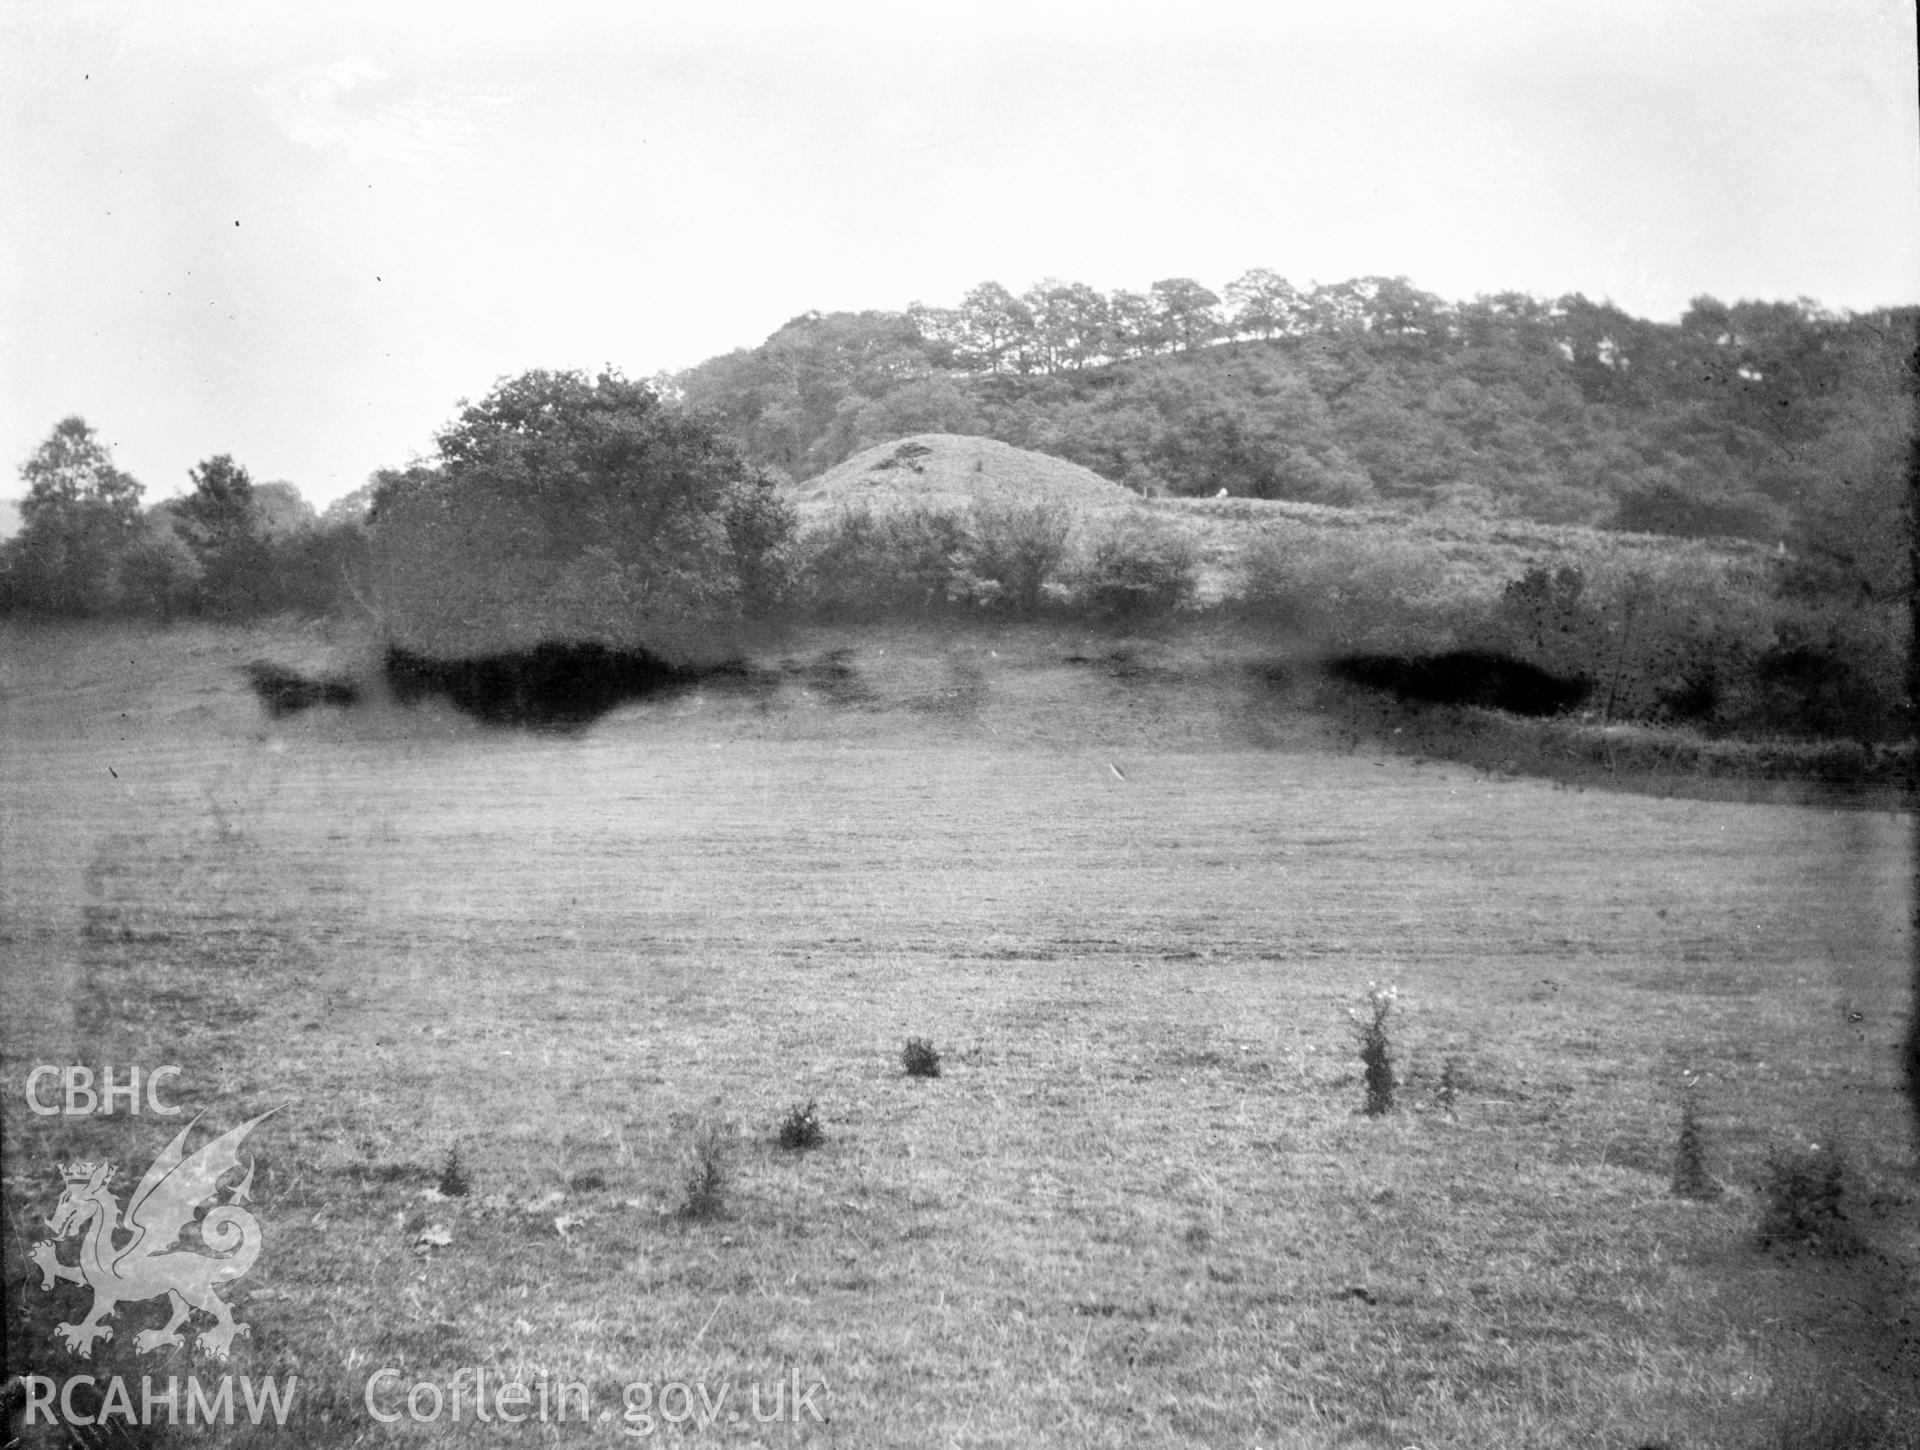 Digital copy of a nitrate negative showing Aberedw Castle Mound, Radnor. From the Cadw Monuments in Care Collection.